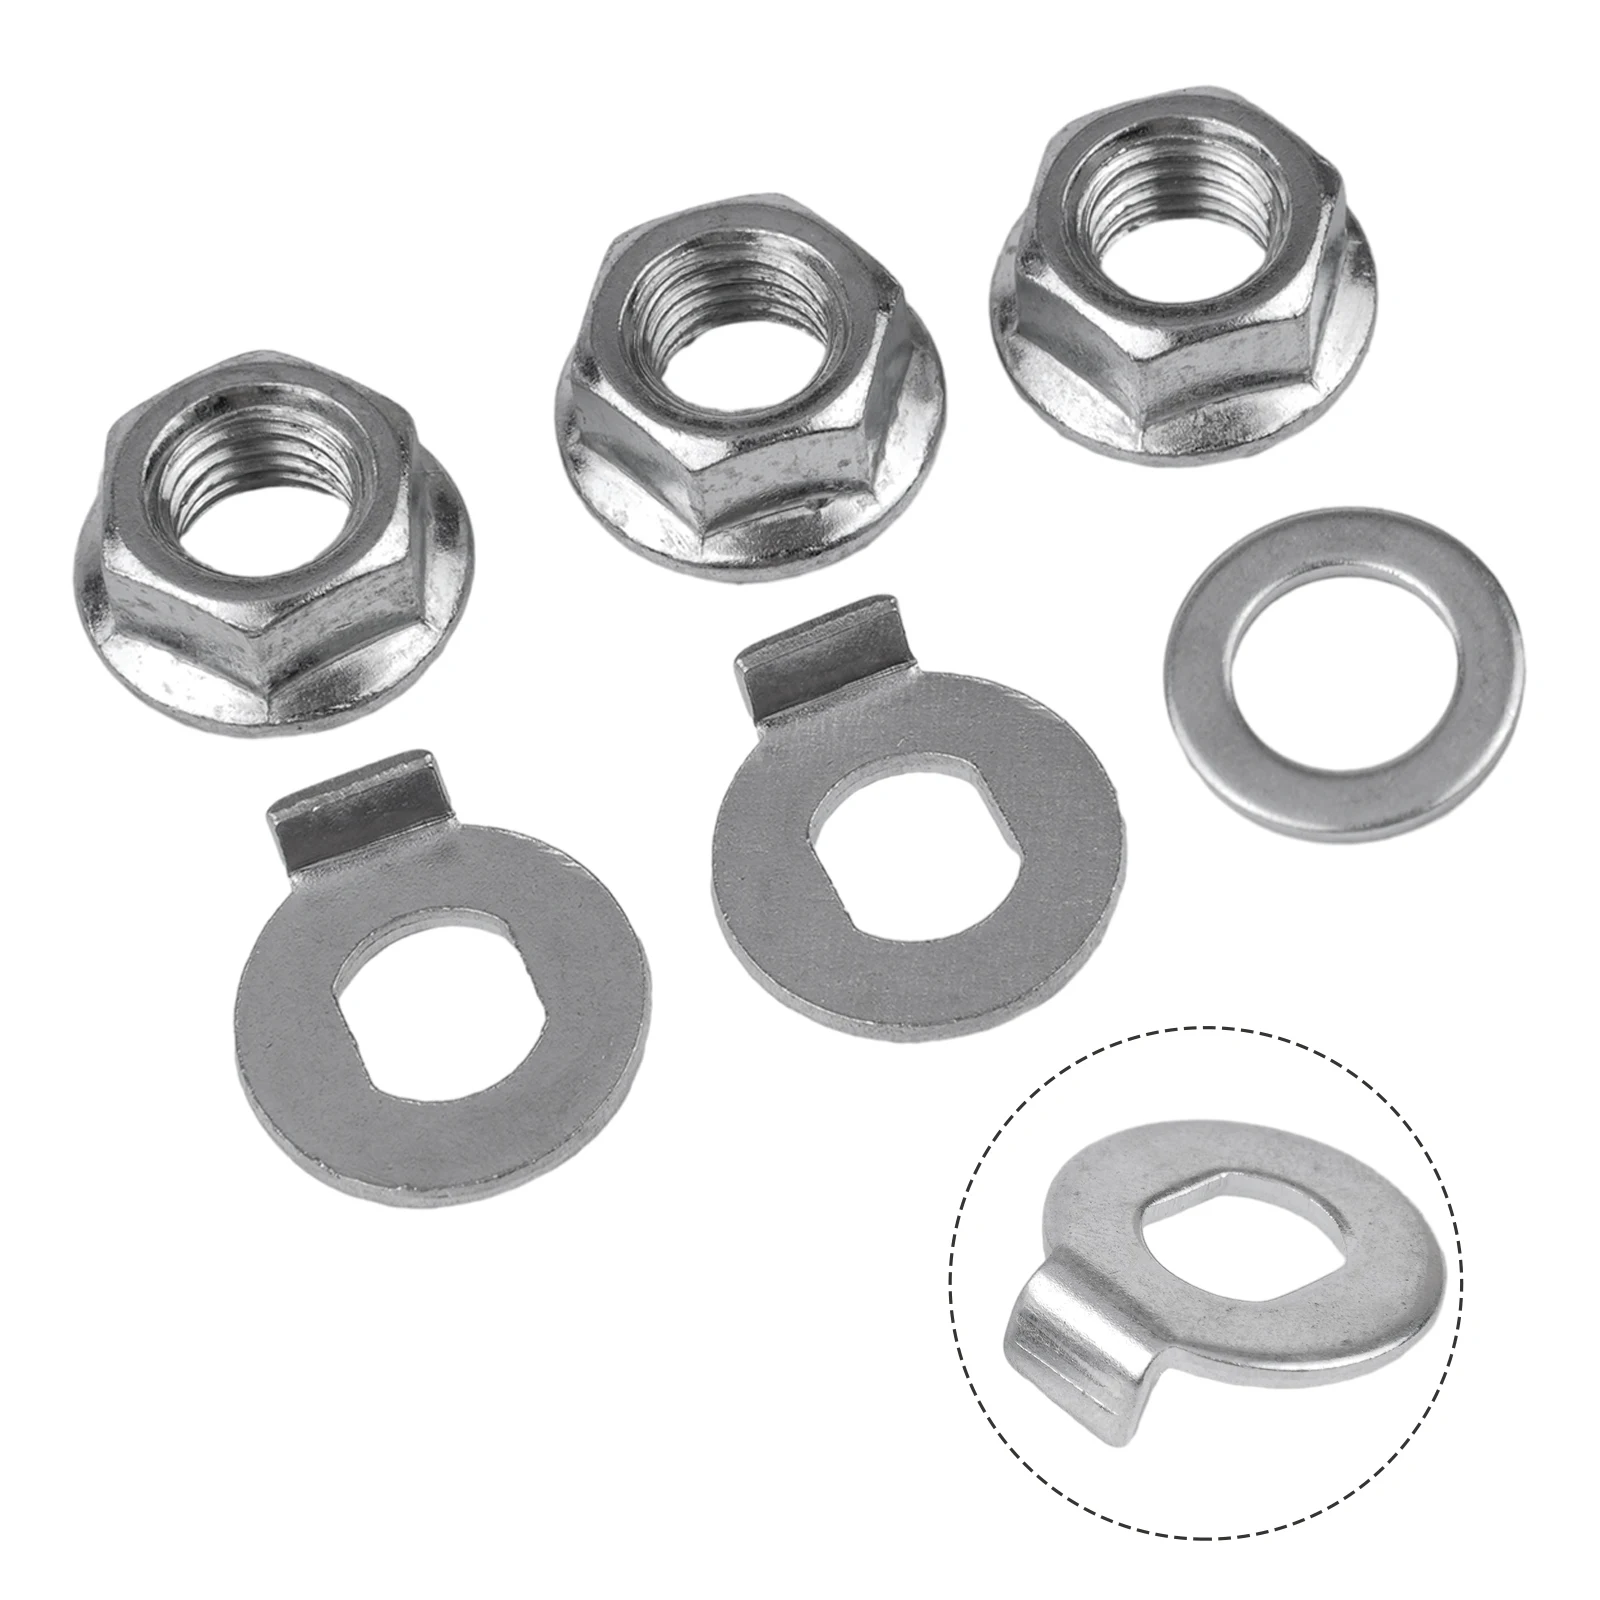 

Ebike Nut 1 Set Nuts 12mm (M 12) Easy To Install Easy To Use For 250W-1000W Motors For Bicycle Replacement For E-bike Brand New